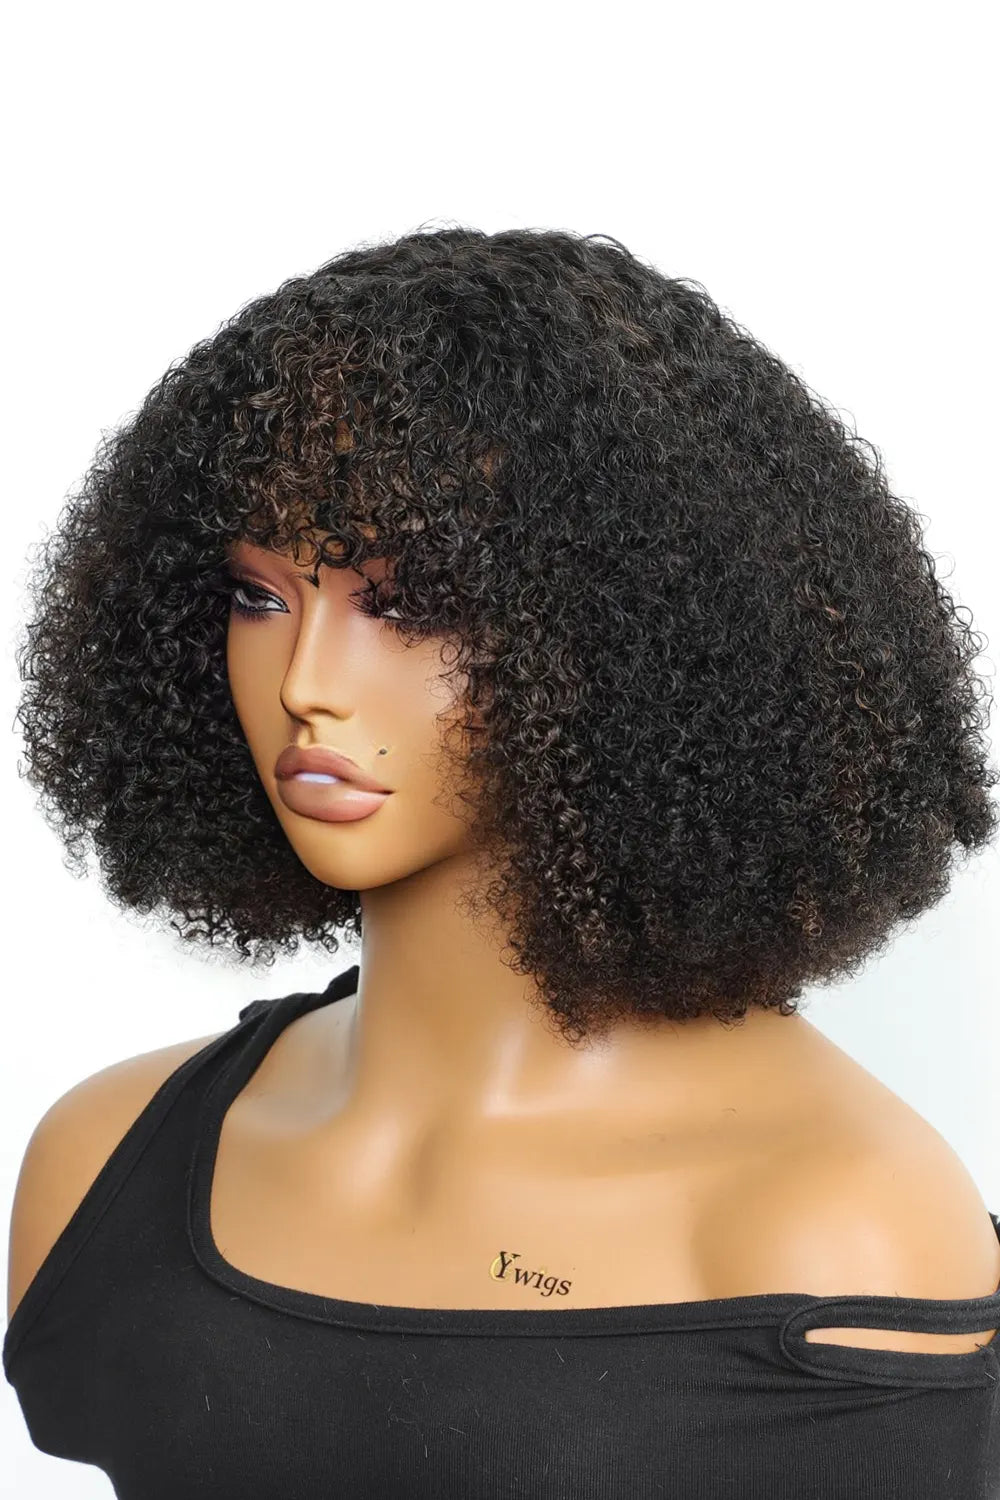 no-glue-wigs-with-lace-front-top-and-bangs-highlight-brown-curly-4